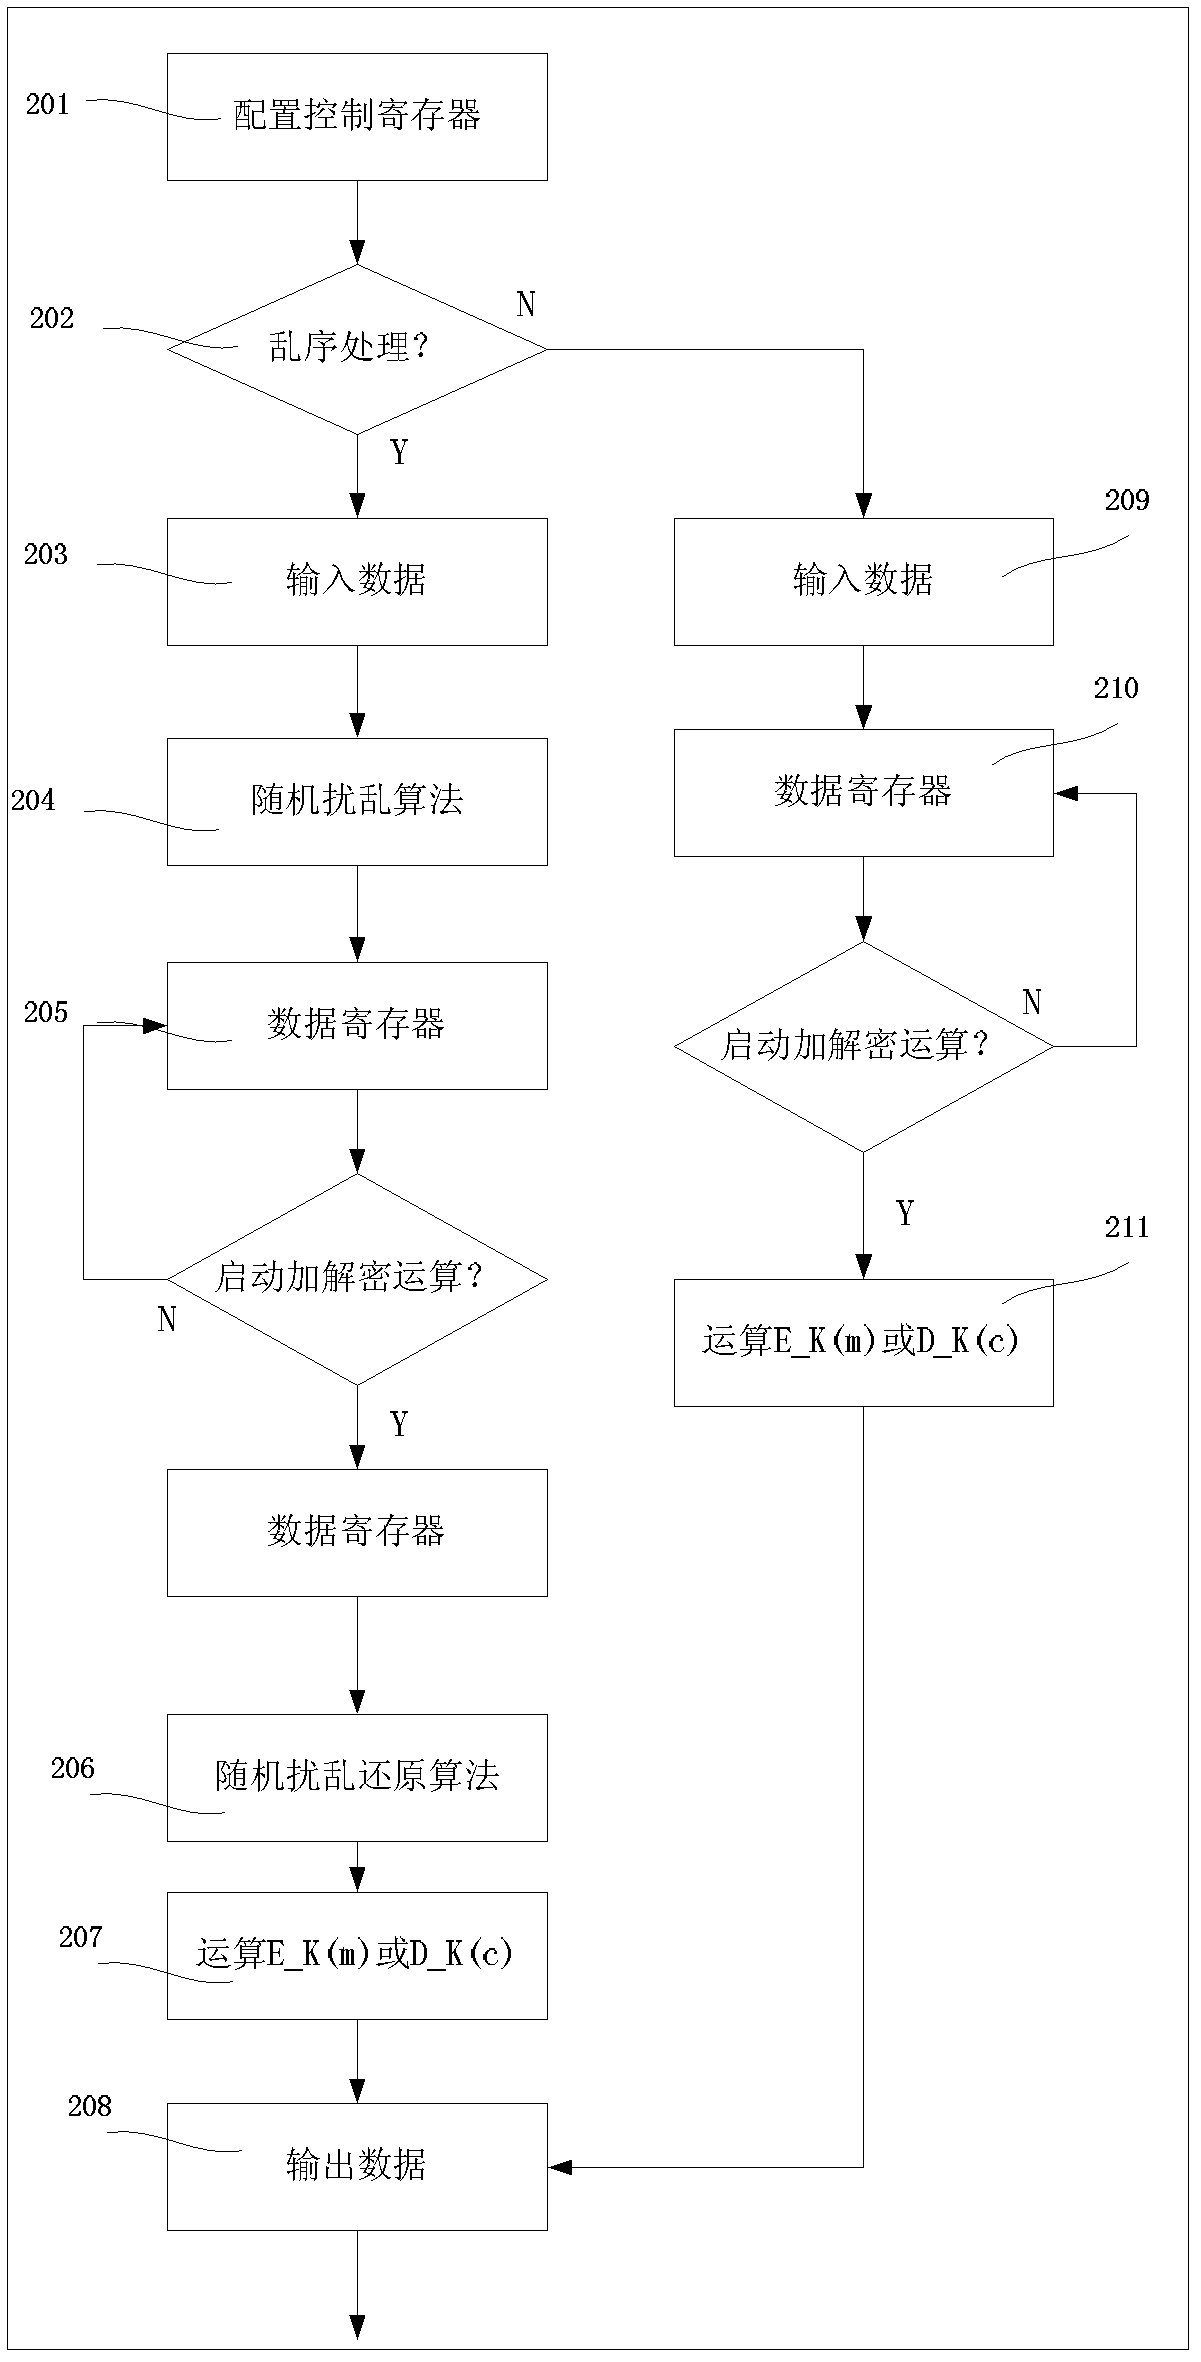 Circuit, chip and method for defending against energy attack on grouping algorithm